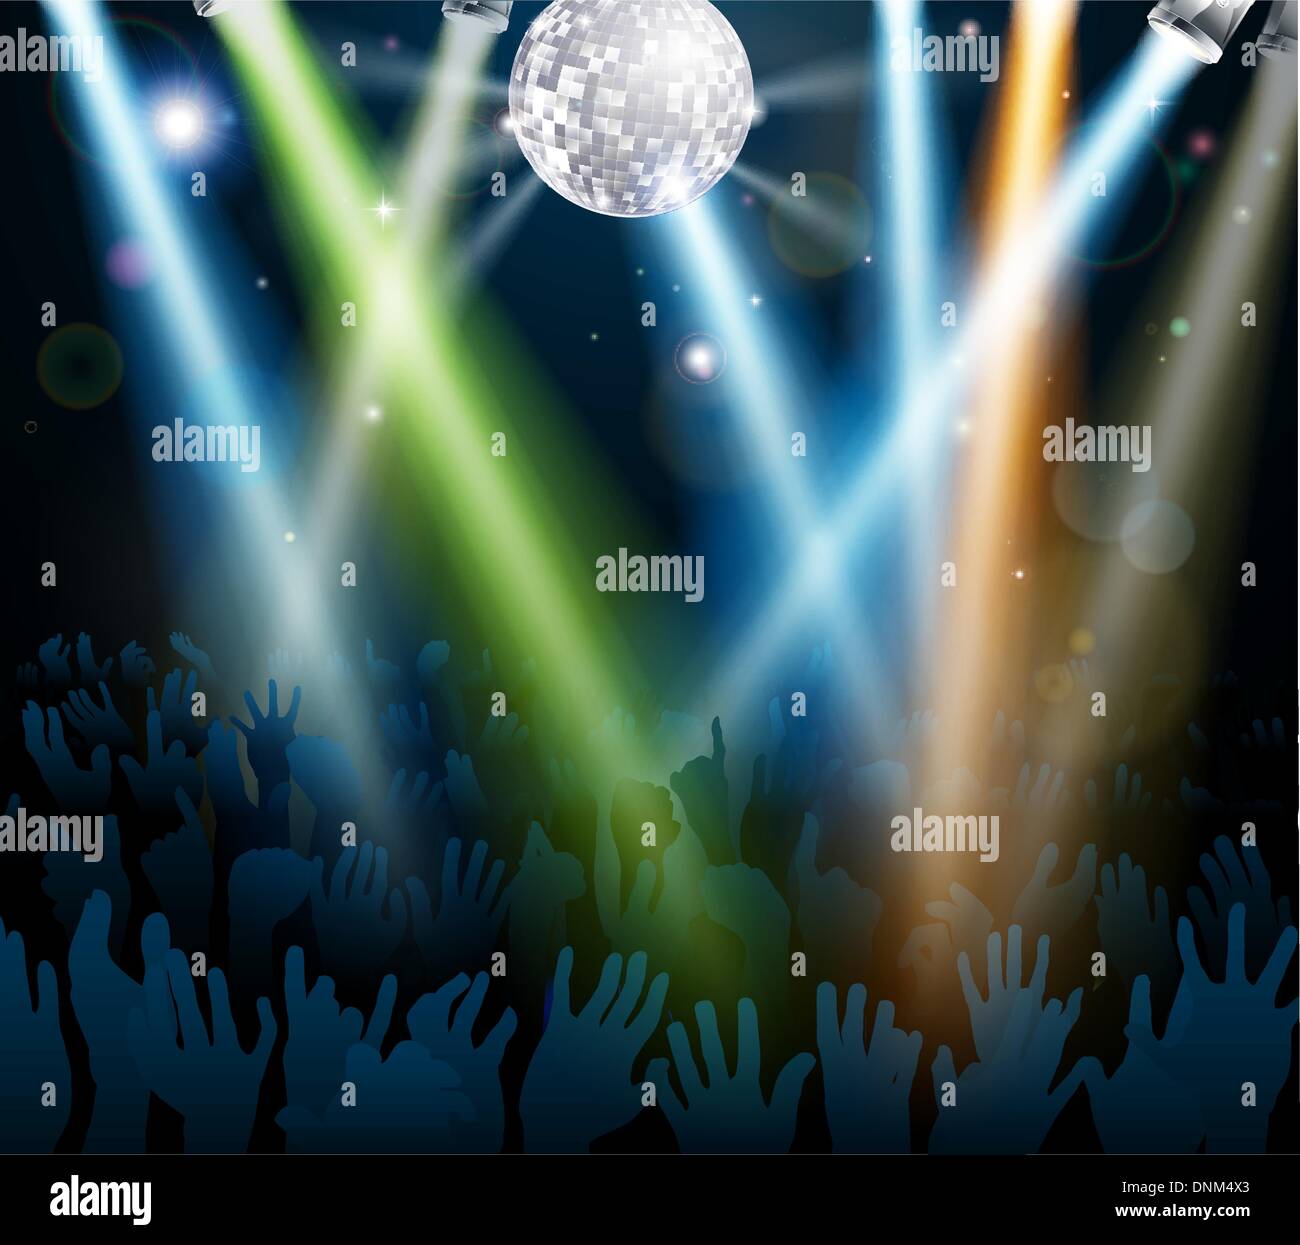 Crowd dancing at a concert or on a disco nightclub dance floor with hands up under a mirror ball with lights Stock Vector